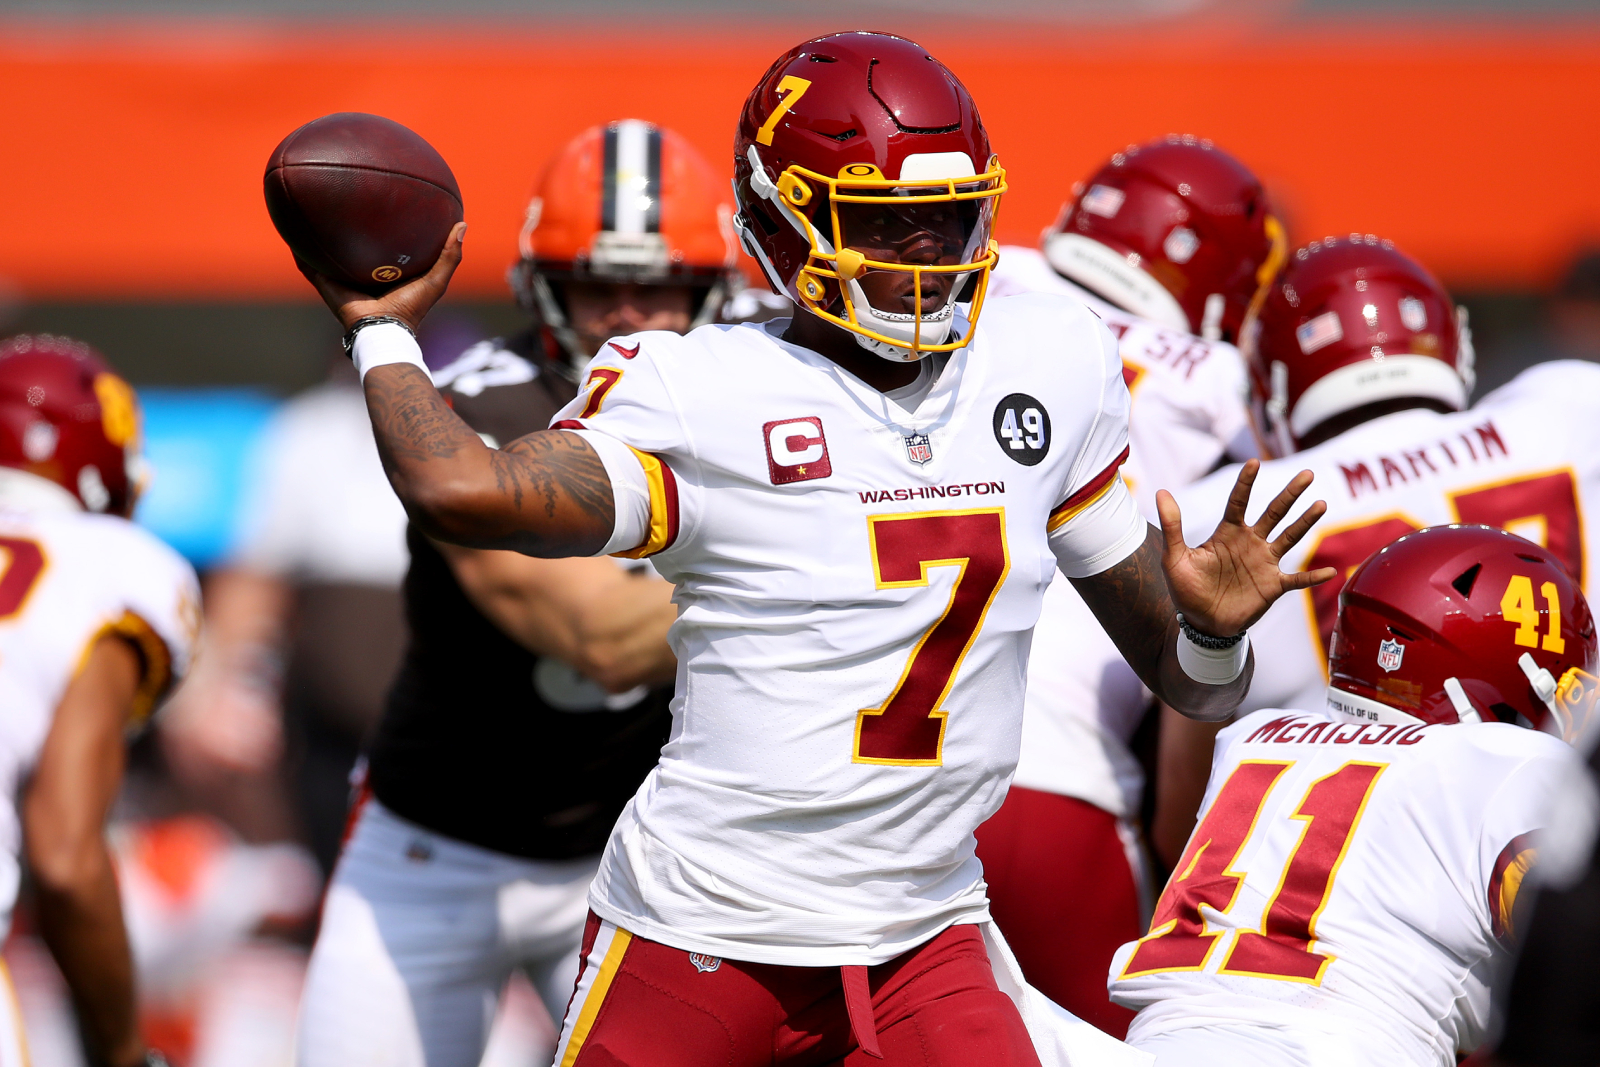 The Washington Football Team has another QB controversy after Kyle Allen's injury. Ron Rivera has since revealed his plan for Dwayne Haskins.